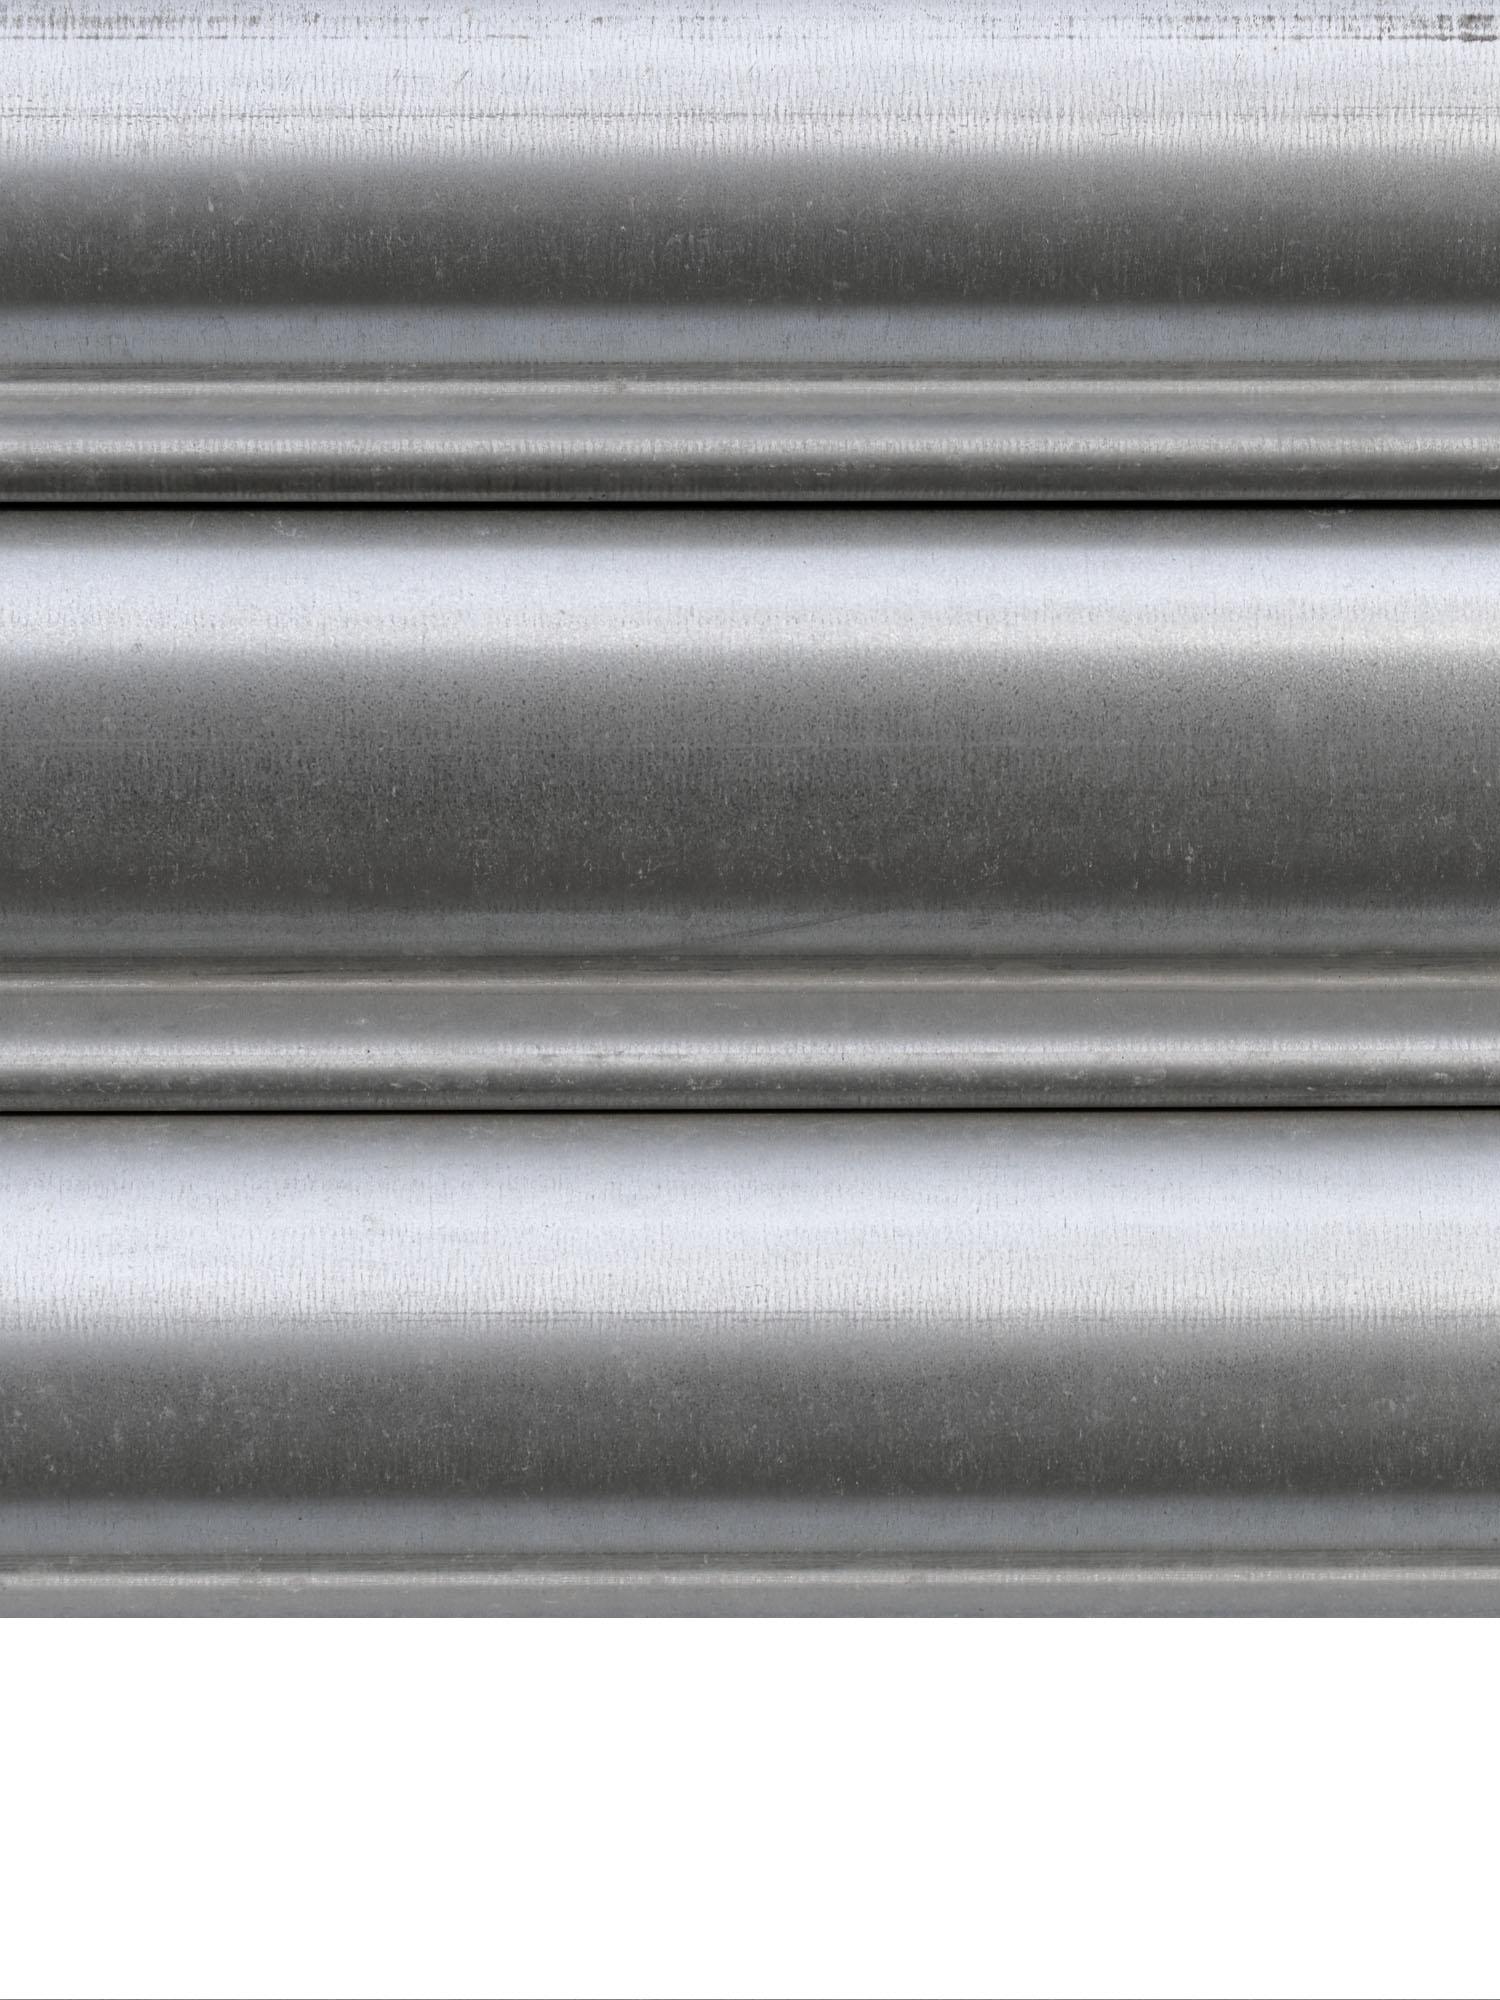 316l stainless steel: 
what you need to know